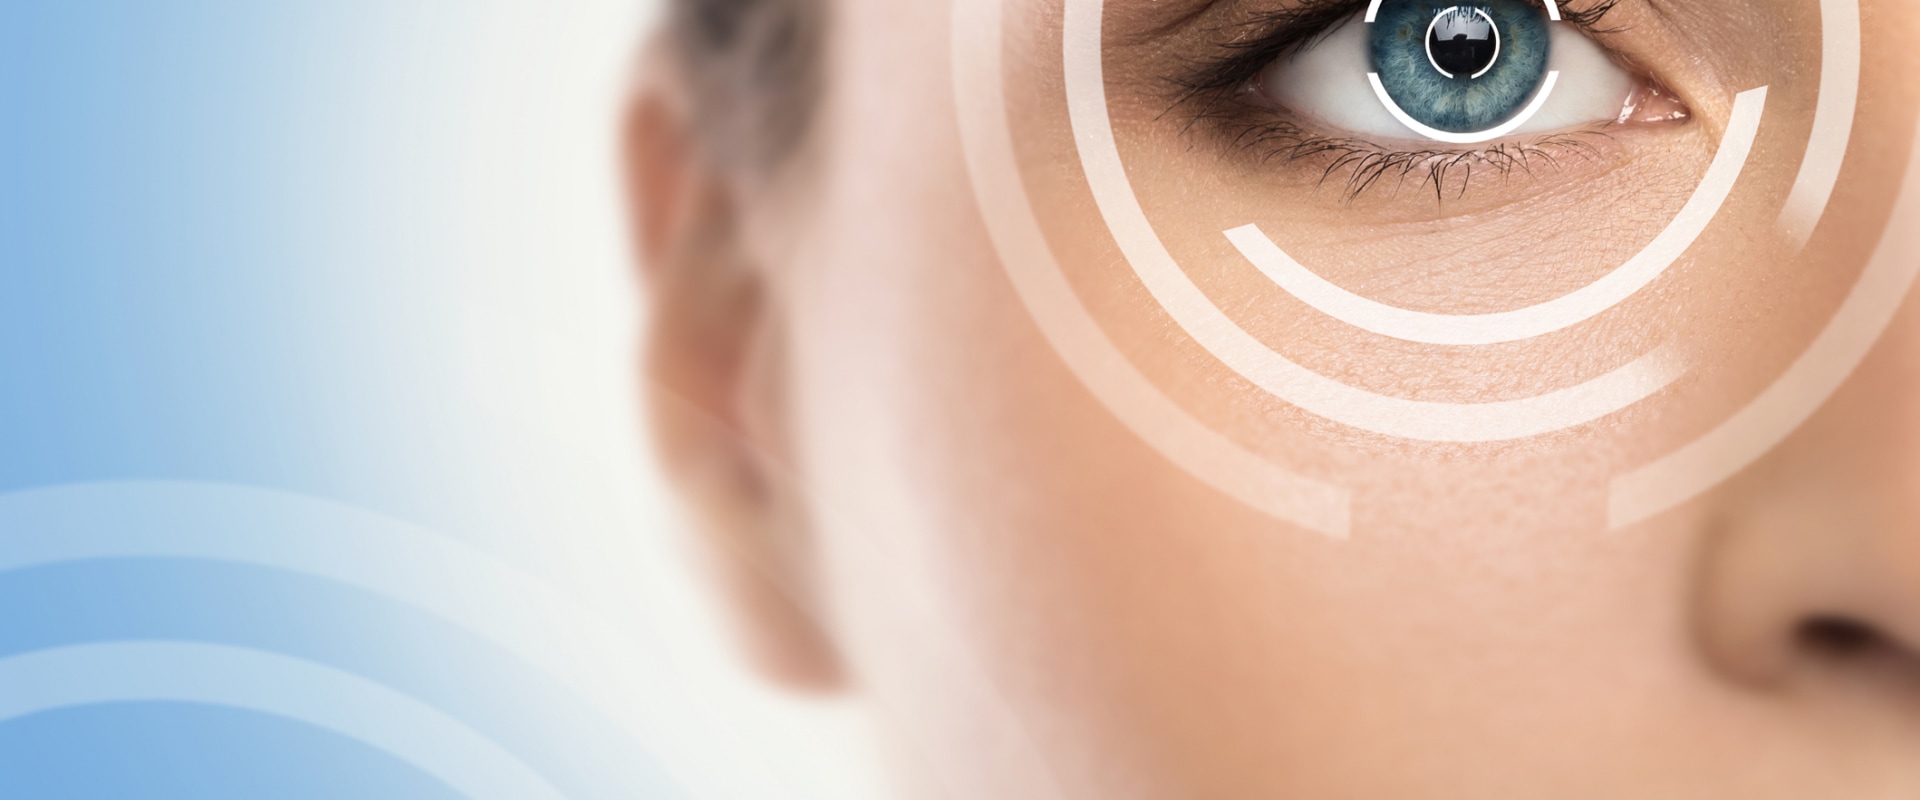 What Type of Anesthesia is Used During LASIK Eye Surgery?